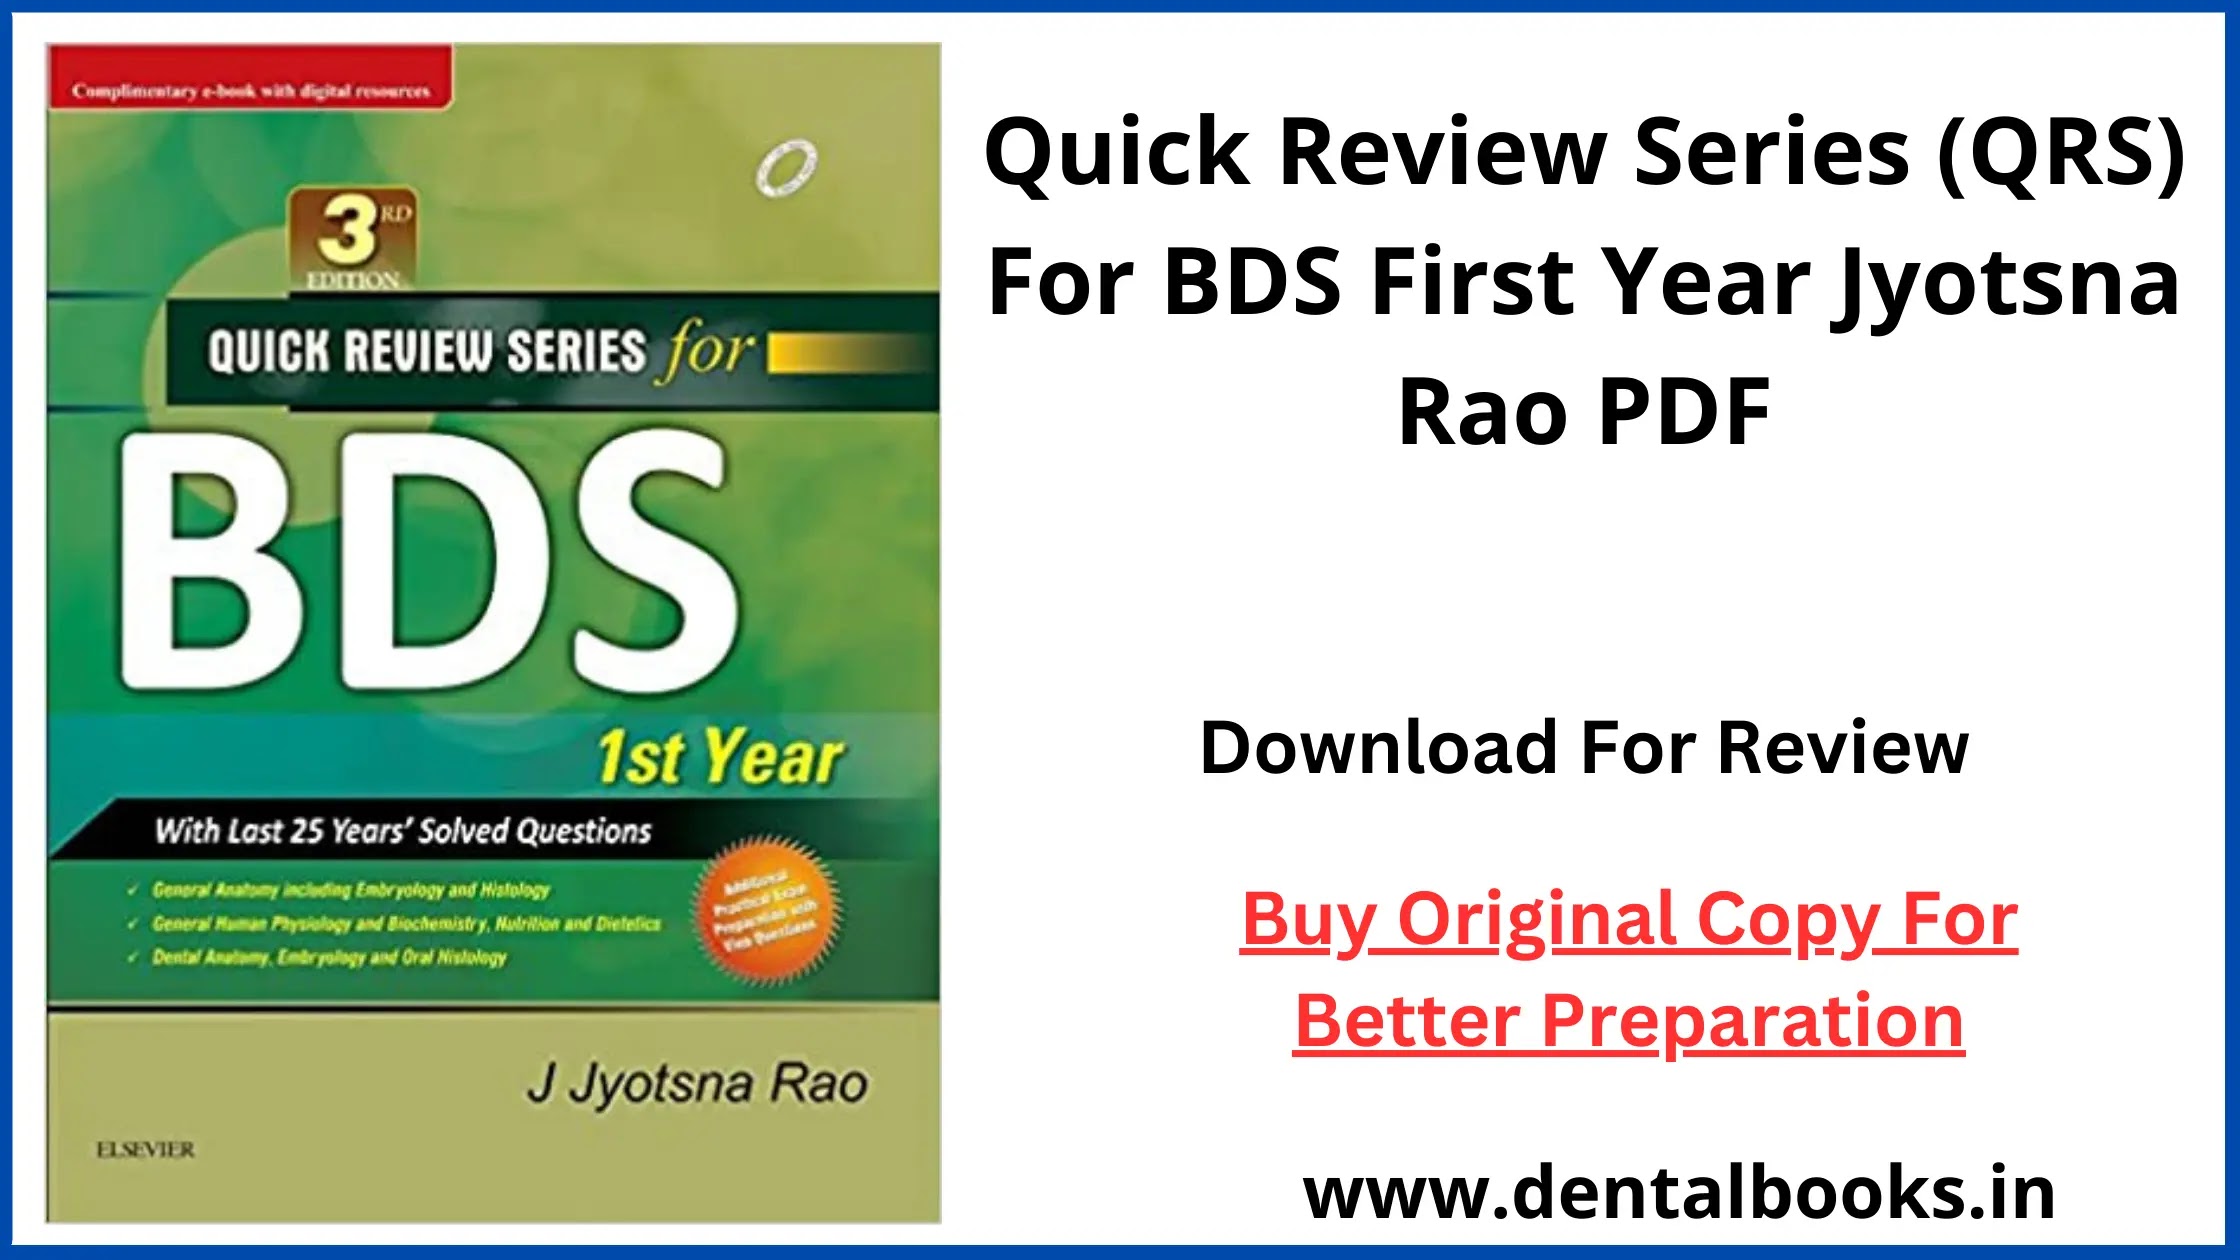 Quick Review Series (QRS) For BDS First Year Jyotsna Rao PDF